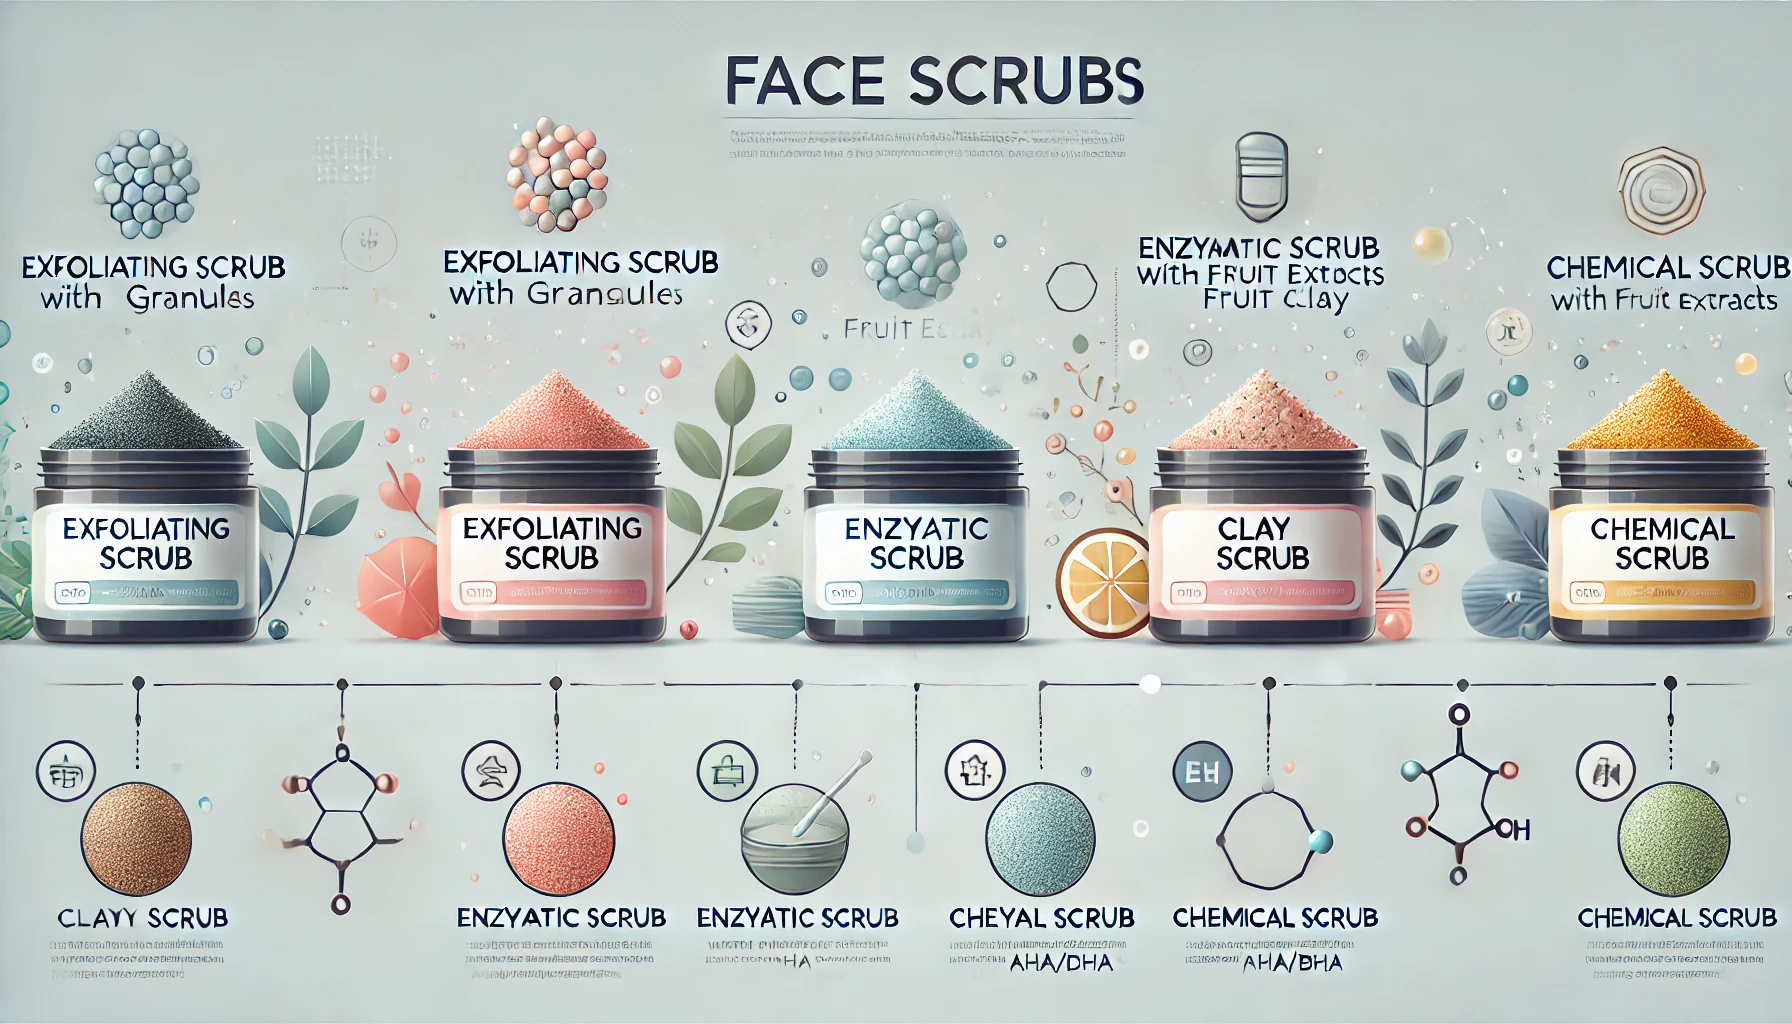 Understanding the different types of face scrubs